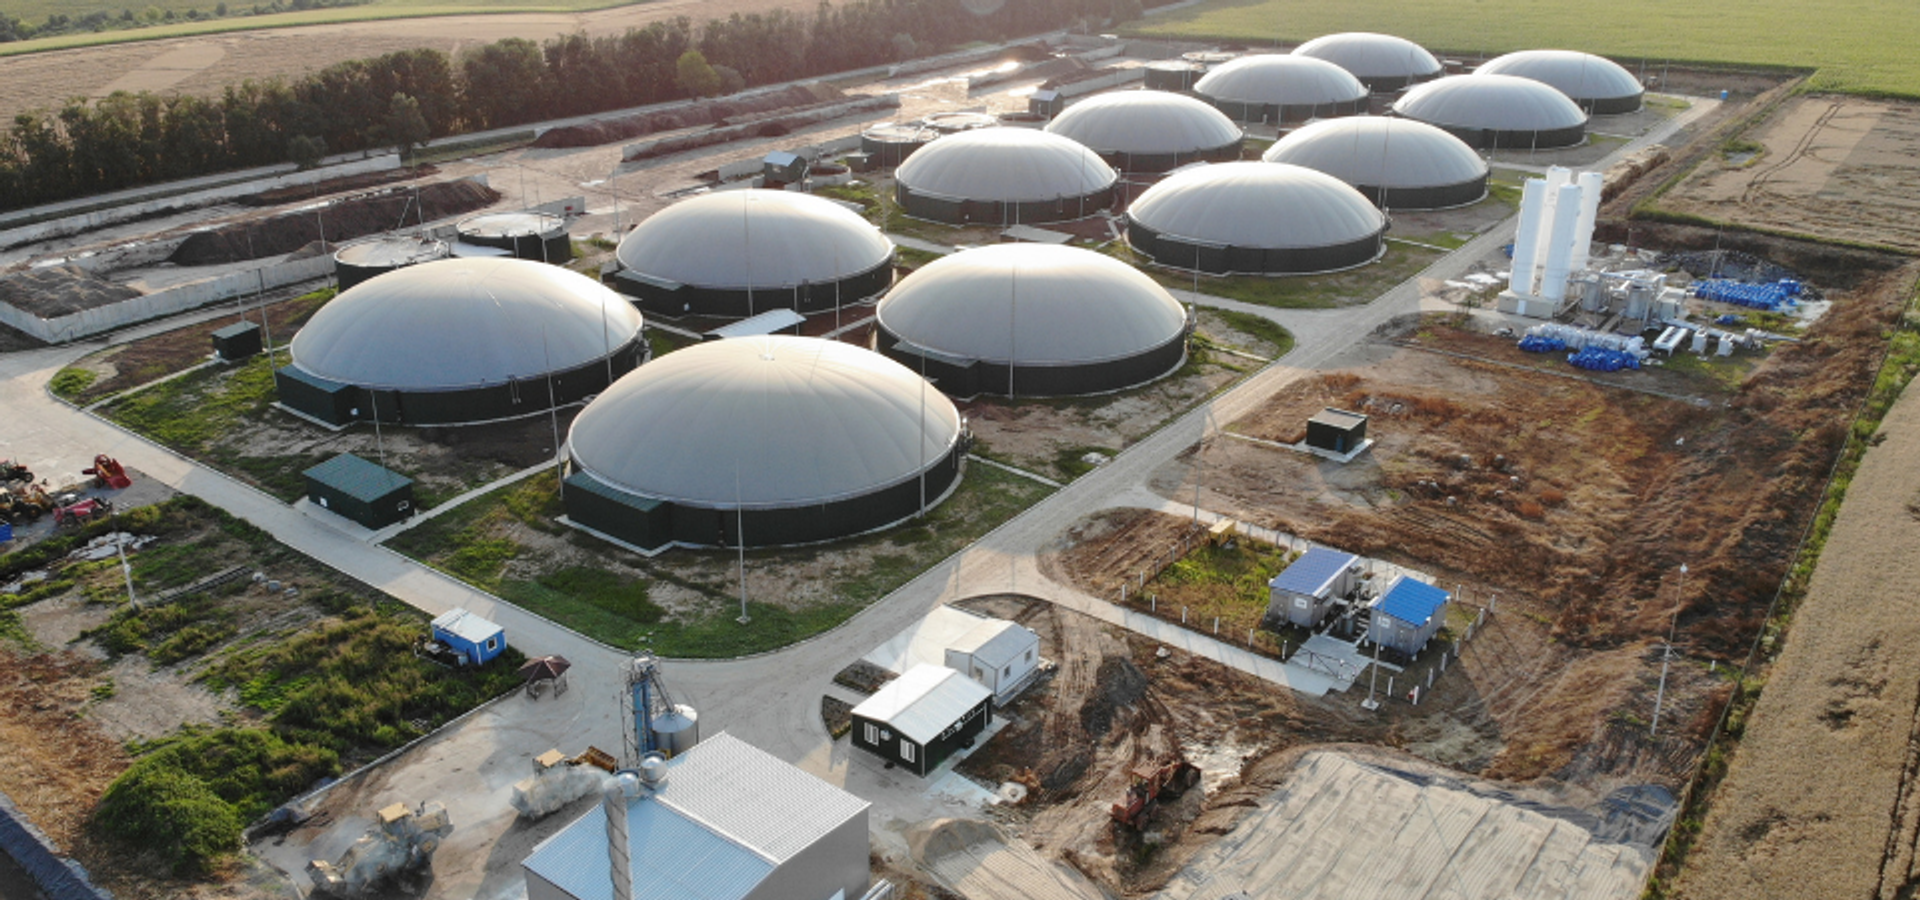 29% More Biogas and 51% Higher Power Generation in Anaerobic Digester with BG Max 3000